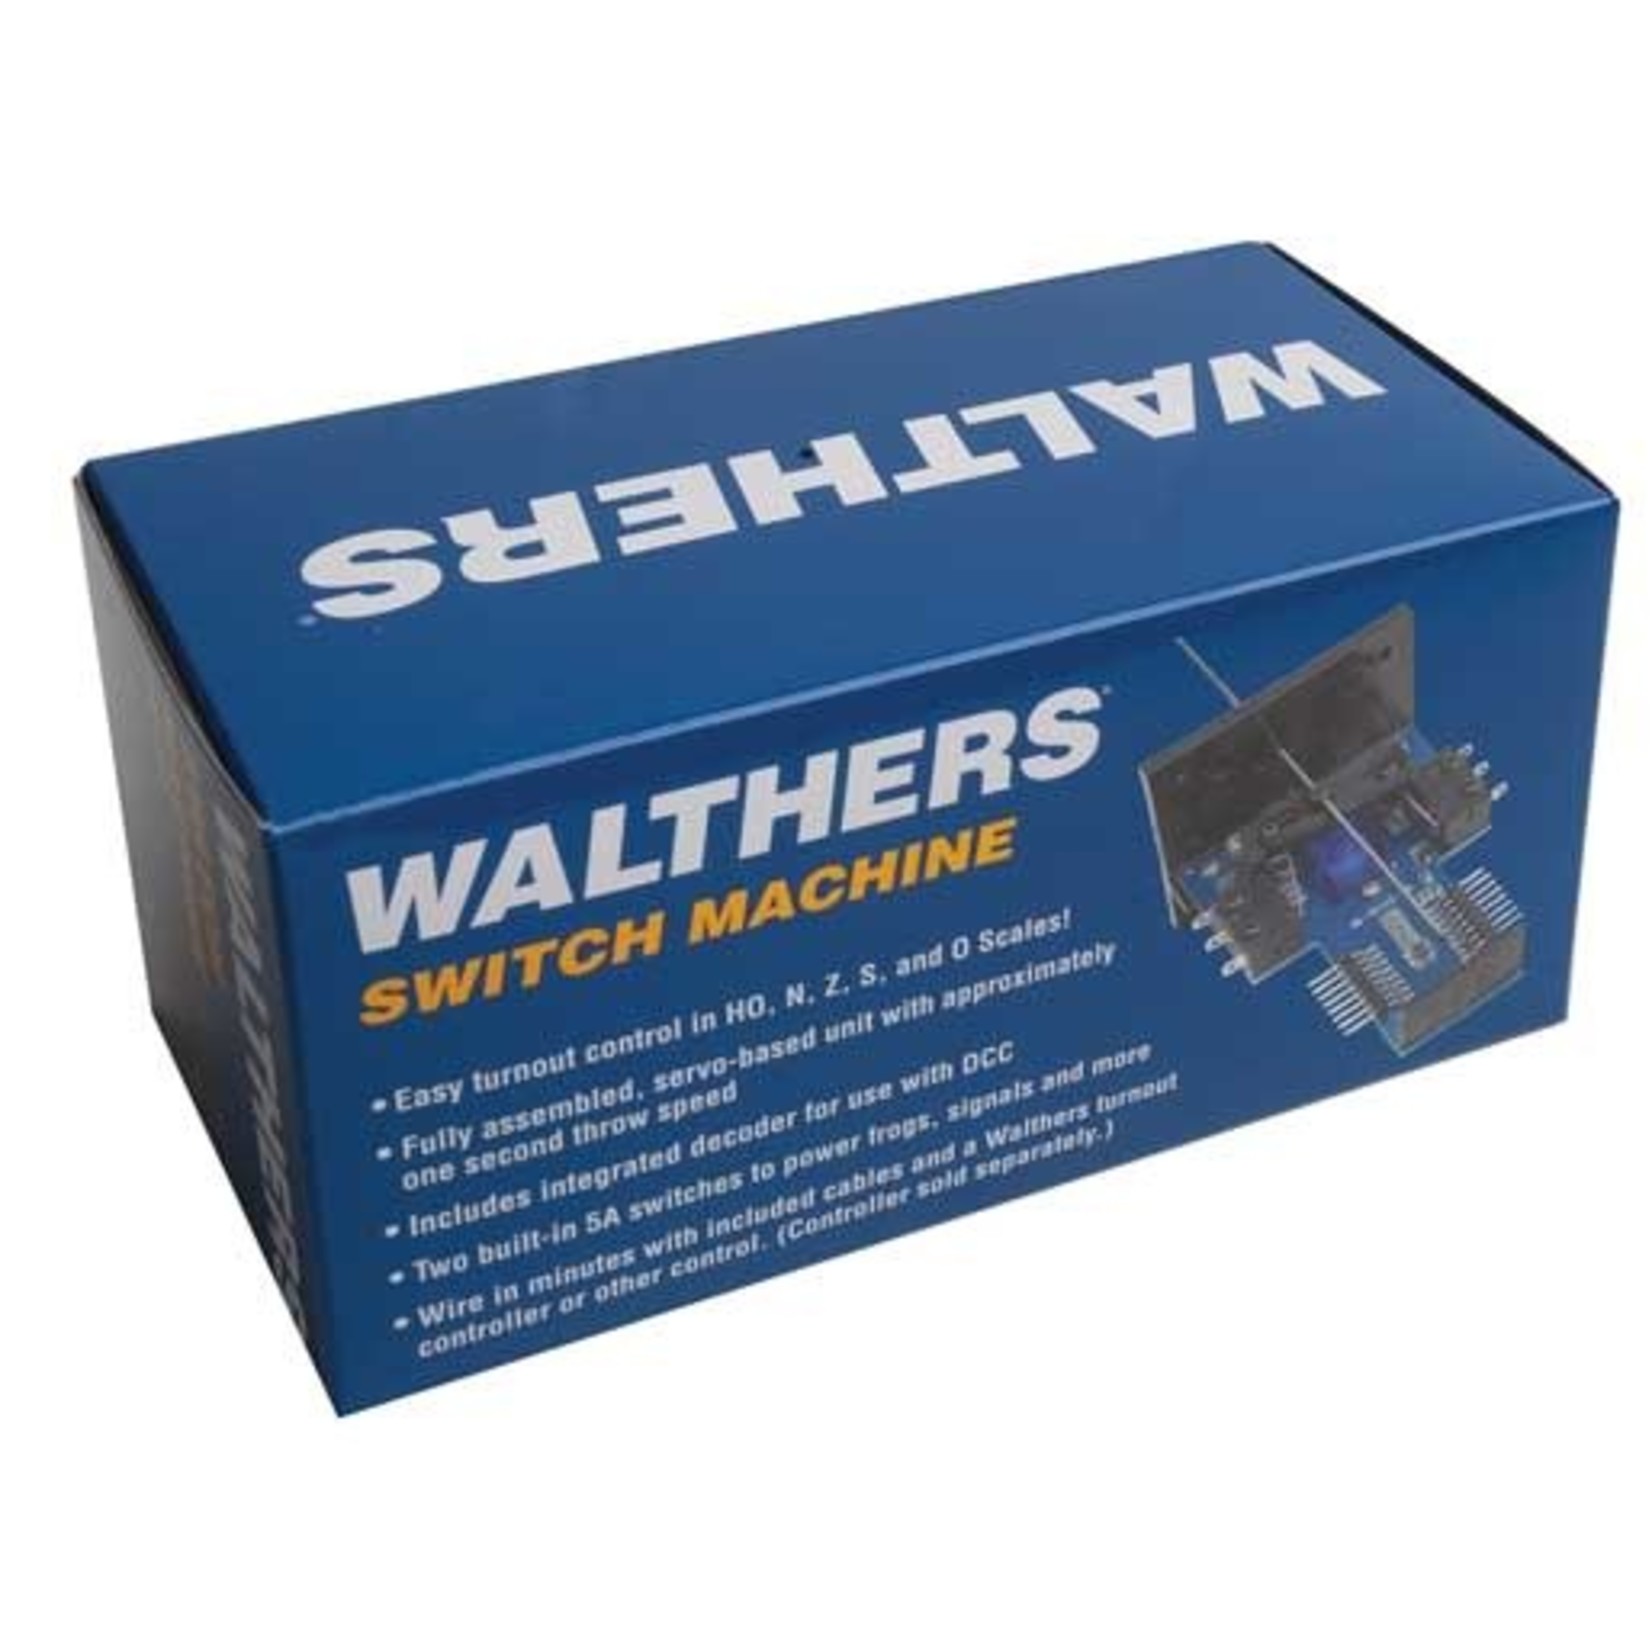 Walthers Vertical-Mount Switch Machine